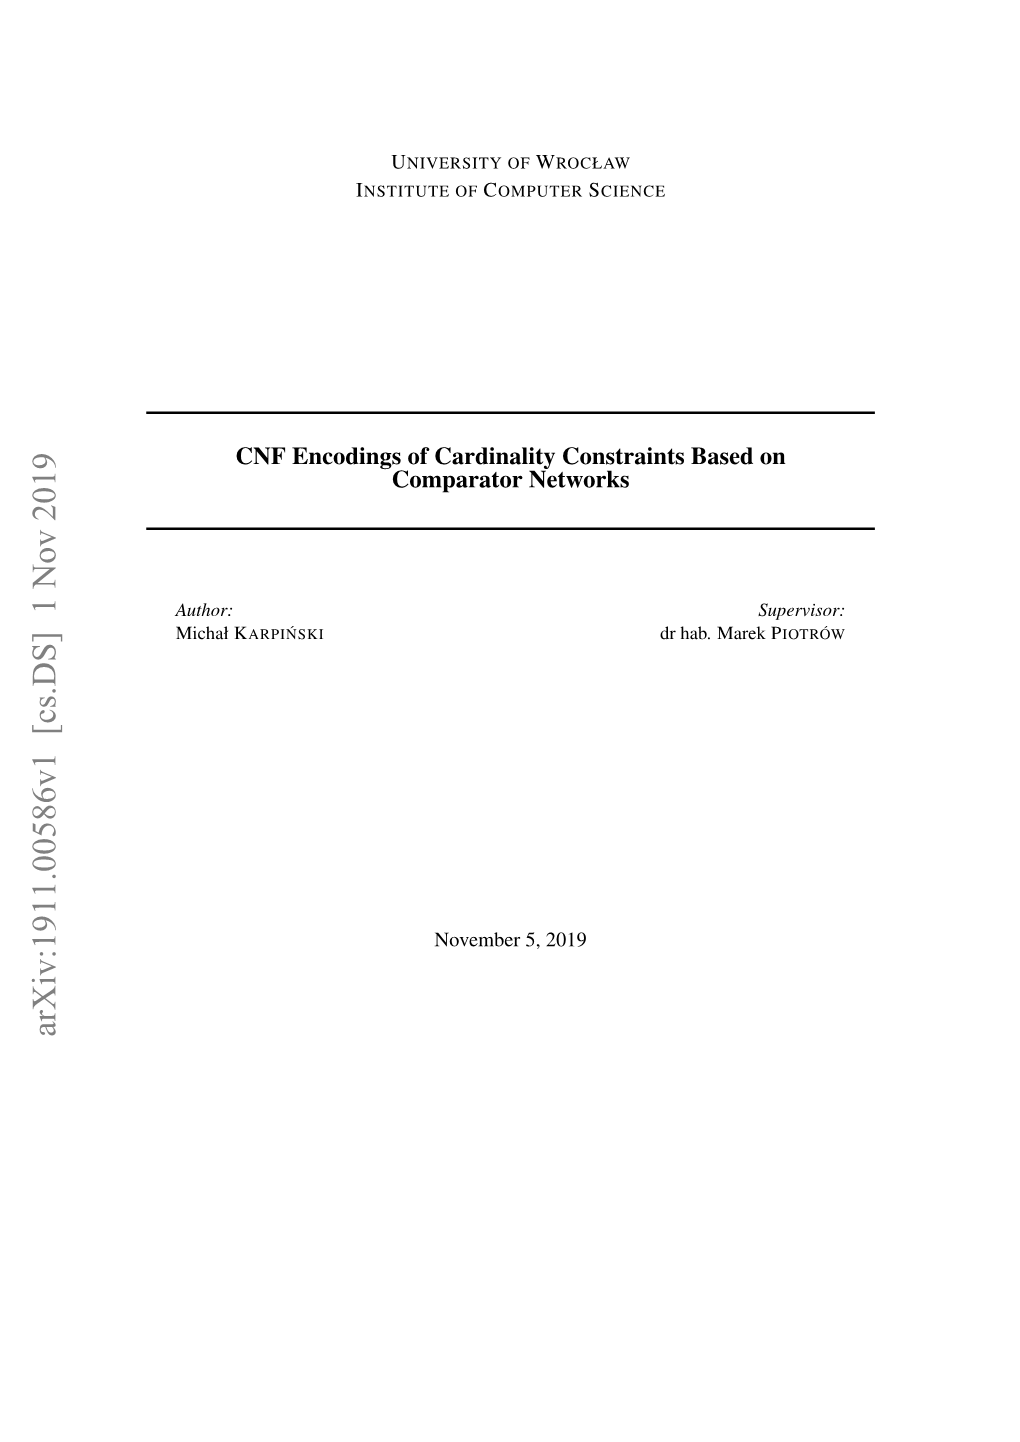 CNF Encodings of Cardinality Constraints Based on Comparator Networks